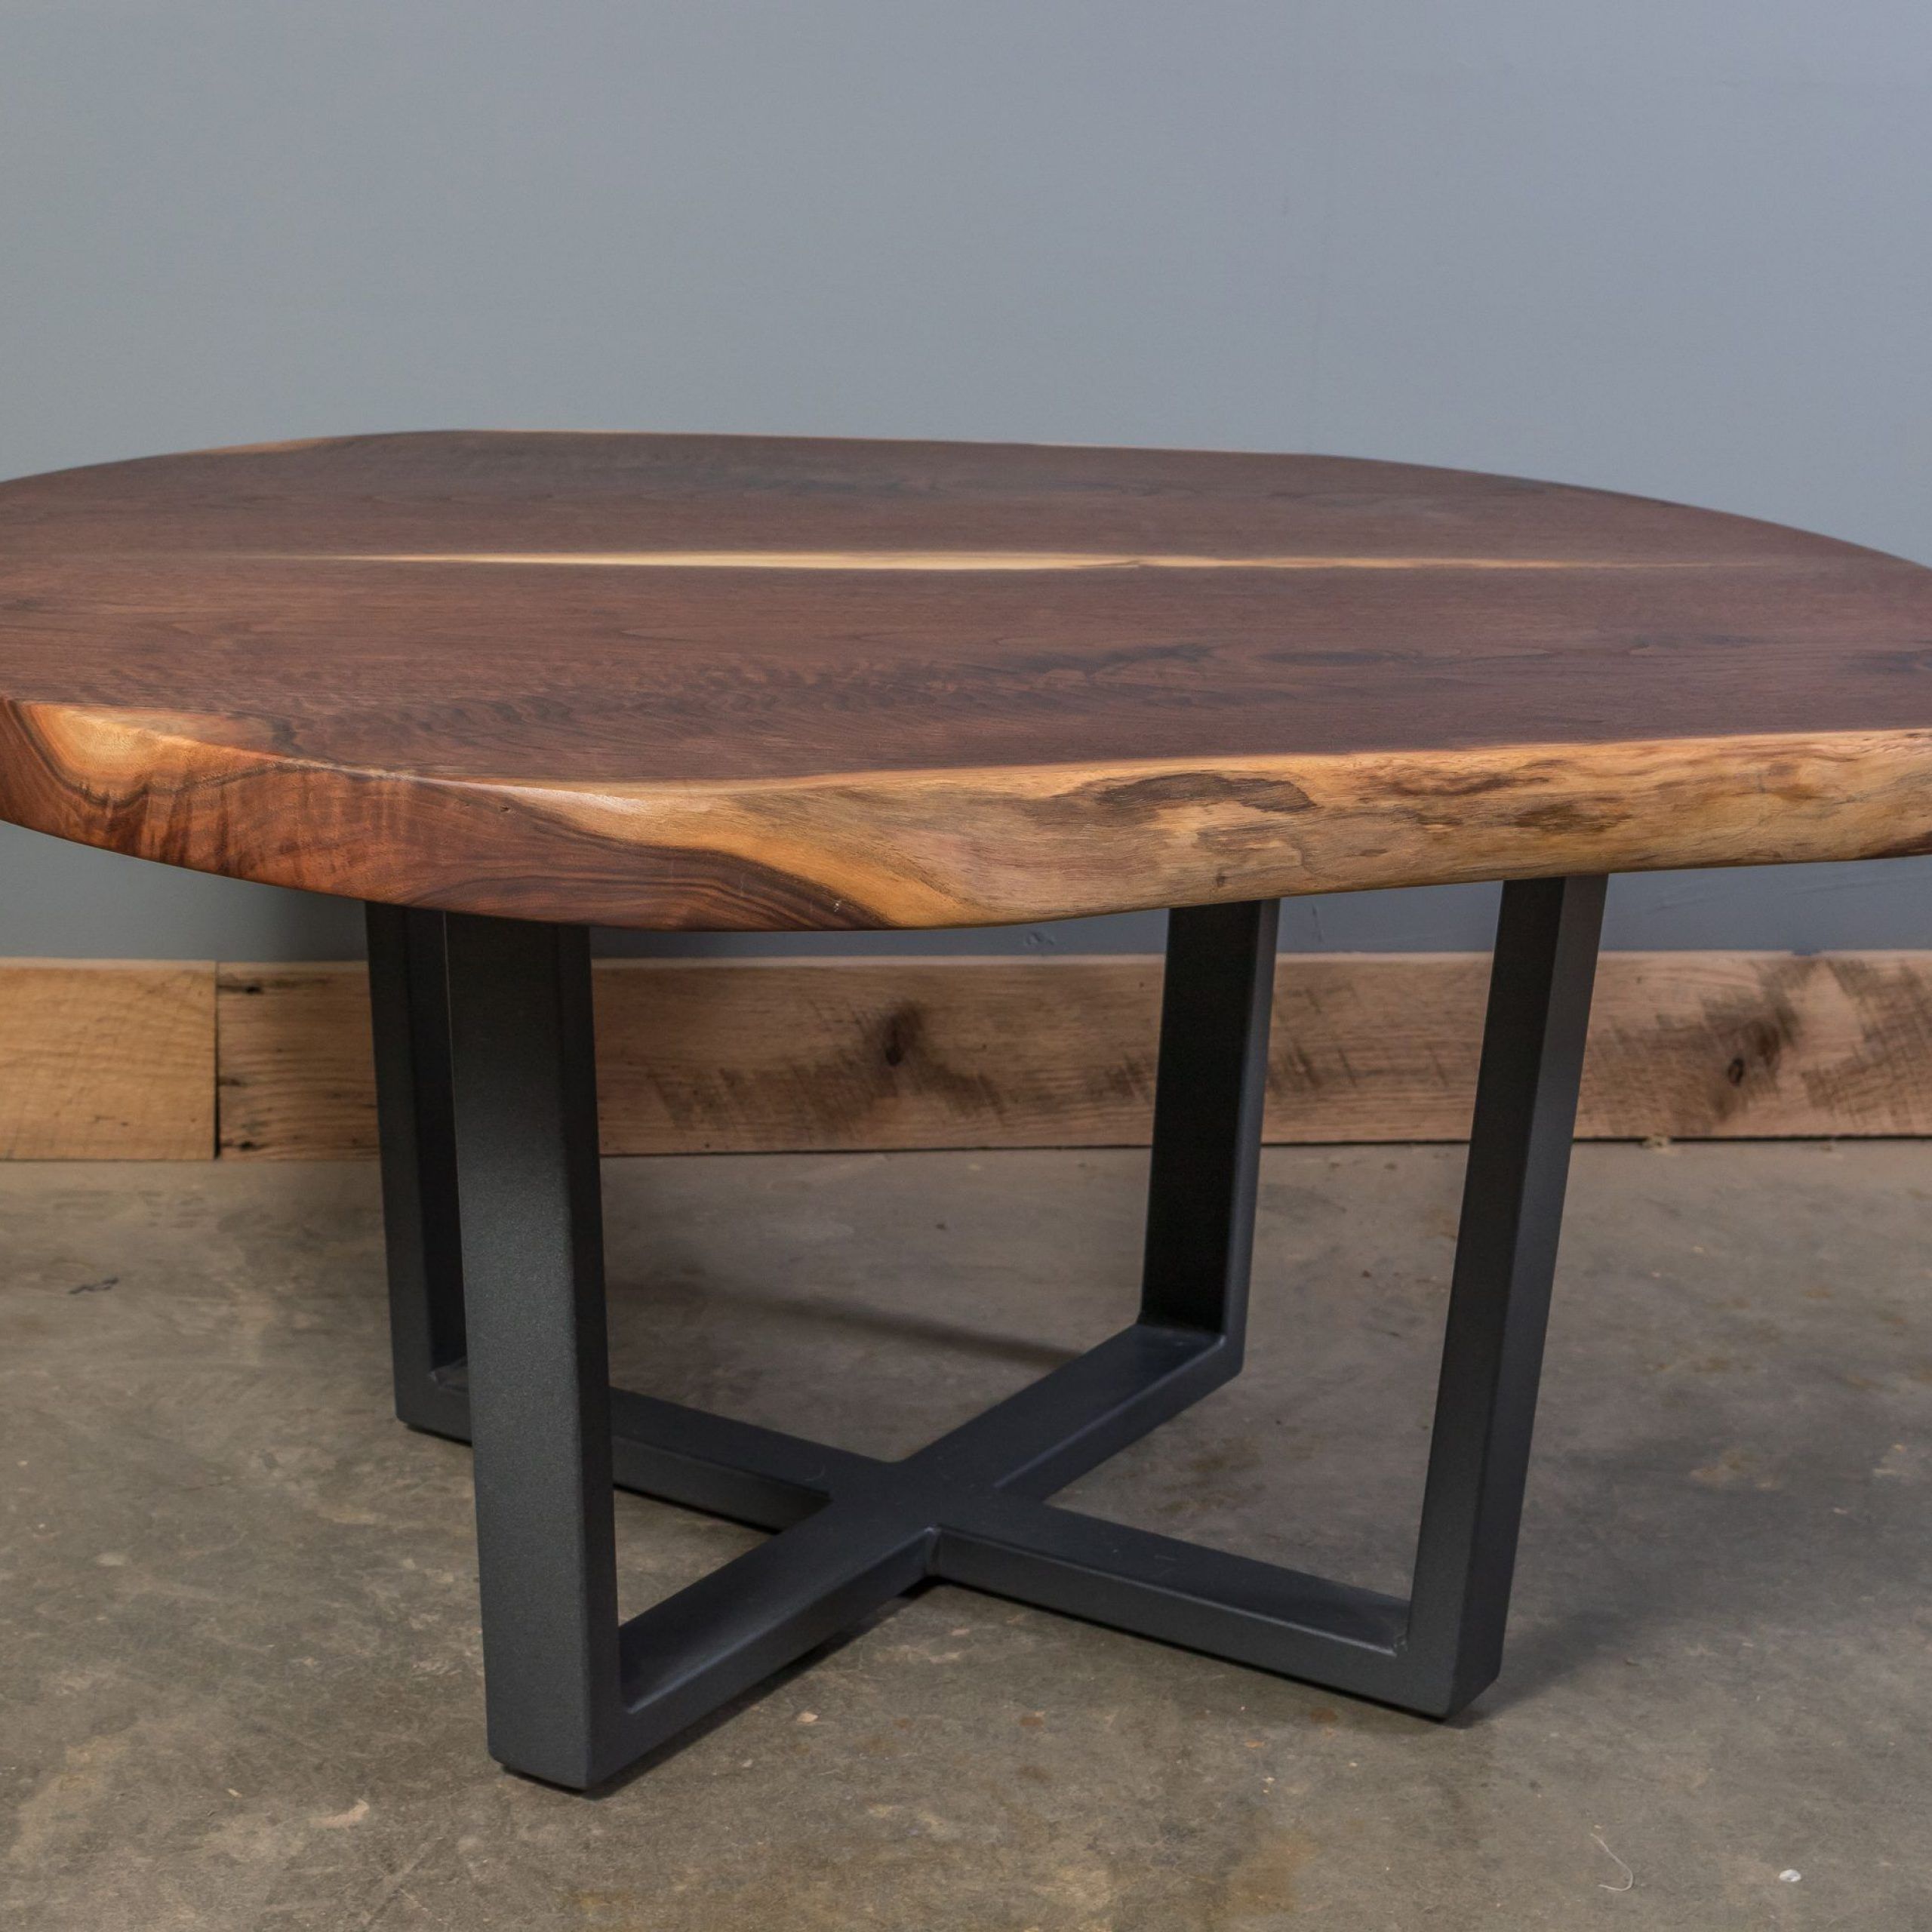 Buy Handmade Live Edge Black Walnut Coffee Table, Made To With Regard To Latest Walnut Coffee Tables (Gallery 13 of 20)